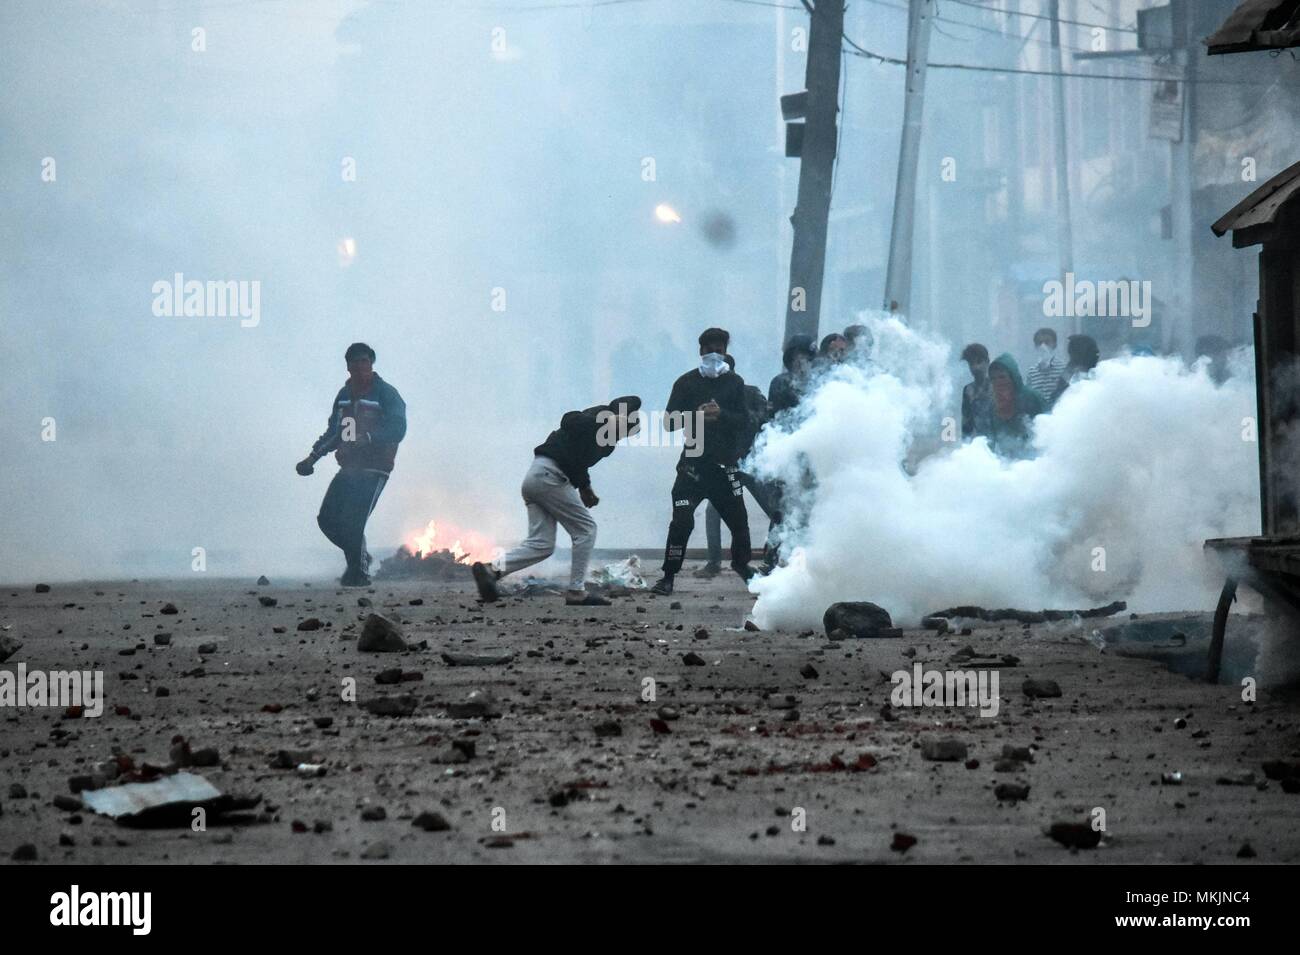 May 8, 2018 - Srinagar, J&K, India - Kashmiri protesters throw stones amid tear smoke during clashes with government forces in Srinagar, Indian administered Kashmir. Fierce clashes broke out between government forces and Kashmiri protesters in Srinagar on Tuesday as the valley continued to remain tense over the killing of 11 people including 5 militants and 6 civilians in Indian administered Kashmir. Police used tear smoke shells and shot gun pellets to disperse hundreds of demonstrators who hurled rocks and chanted anti-Indian and pro-freedom slogans. (Credit Image: © Saqib Majeed/SOPA Images Stock Photo